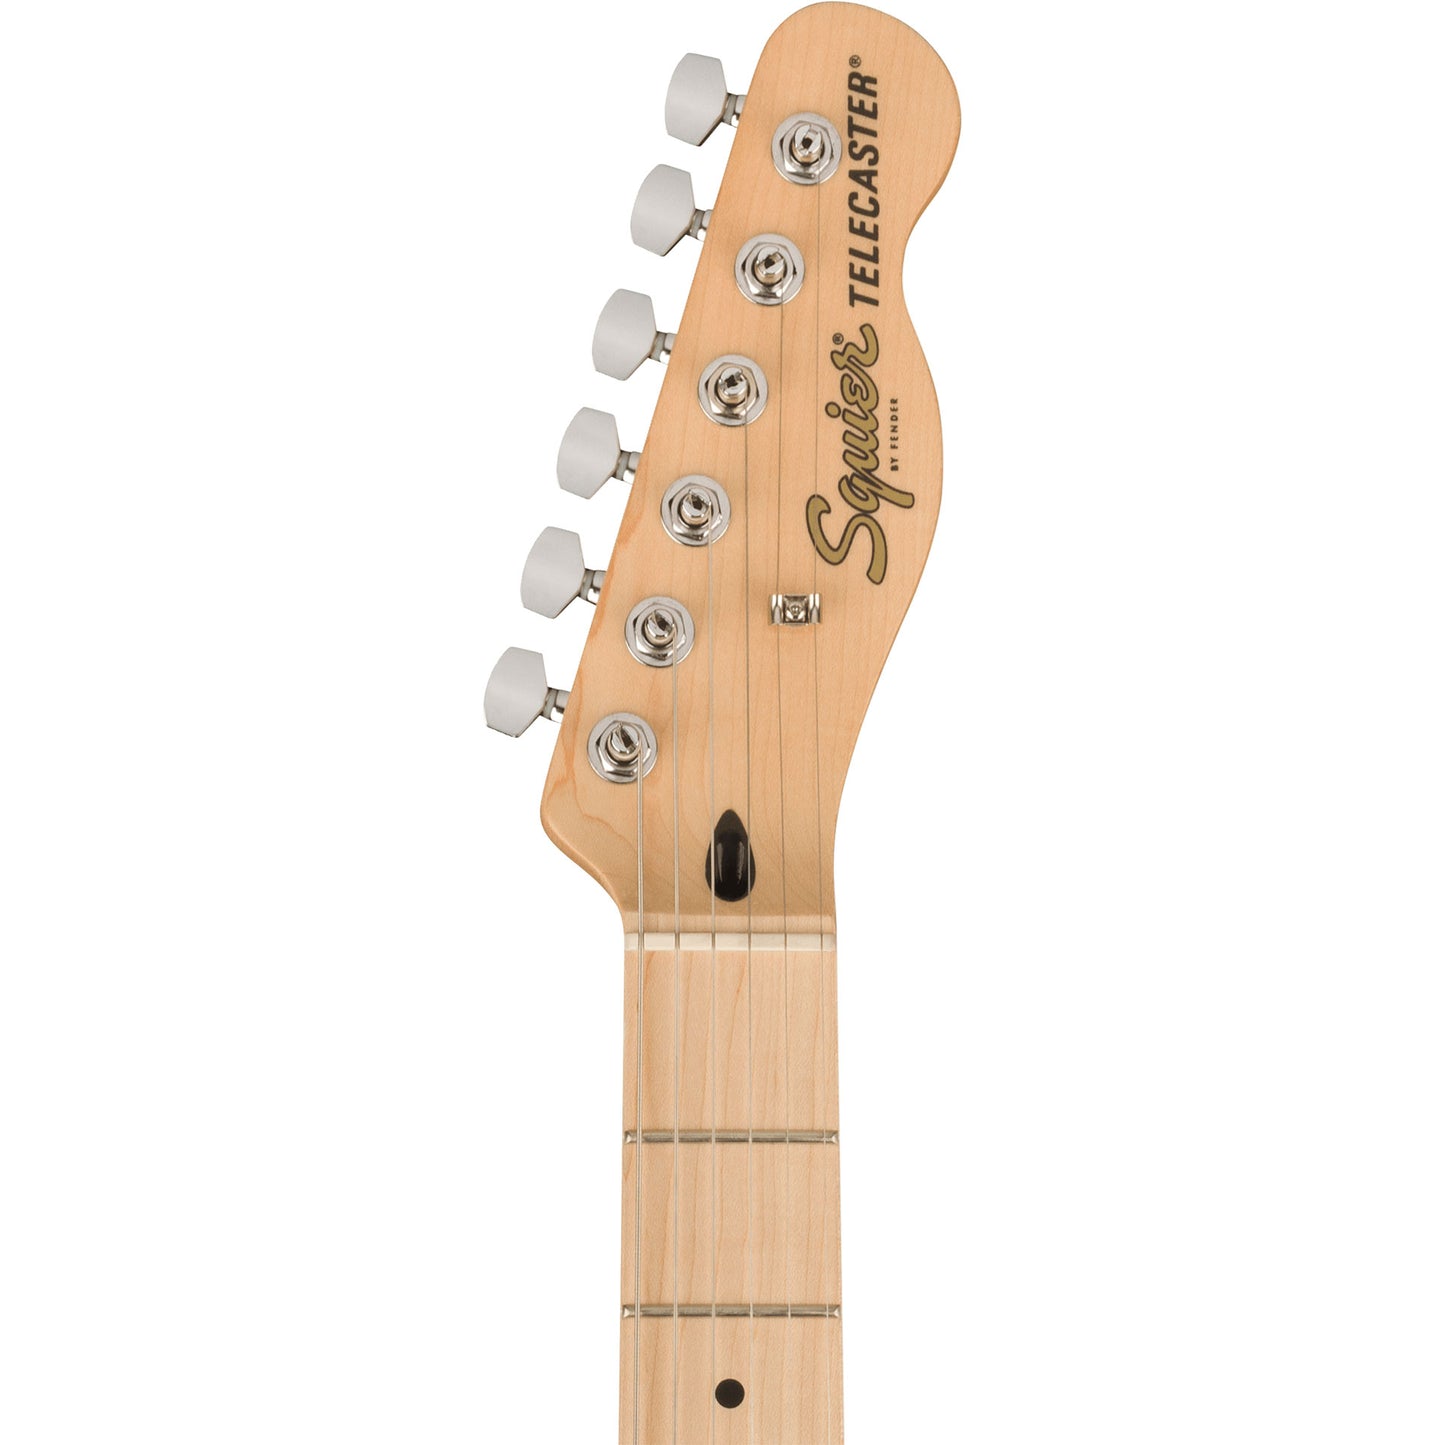 Squier Affinity Series Telecaster Special Electric Guitar in Butterscotch